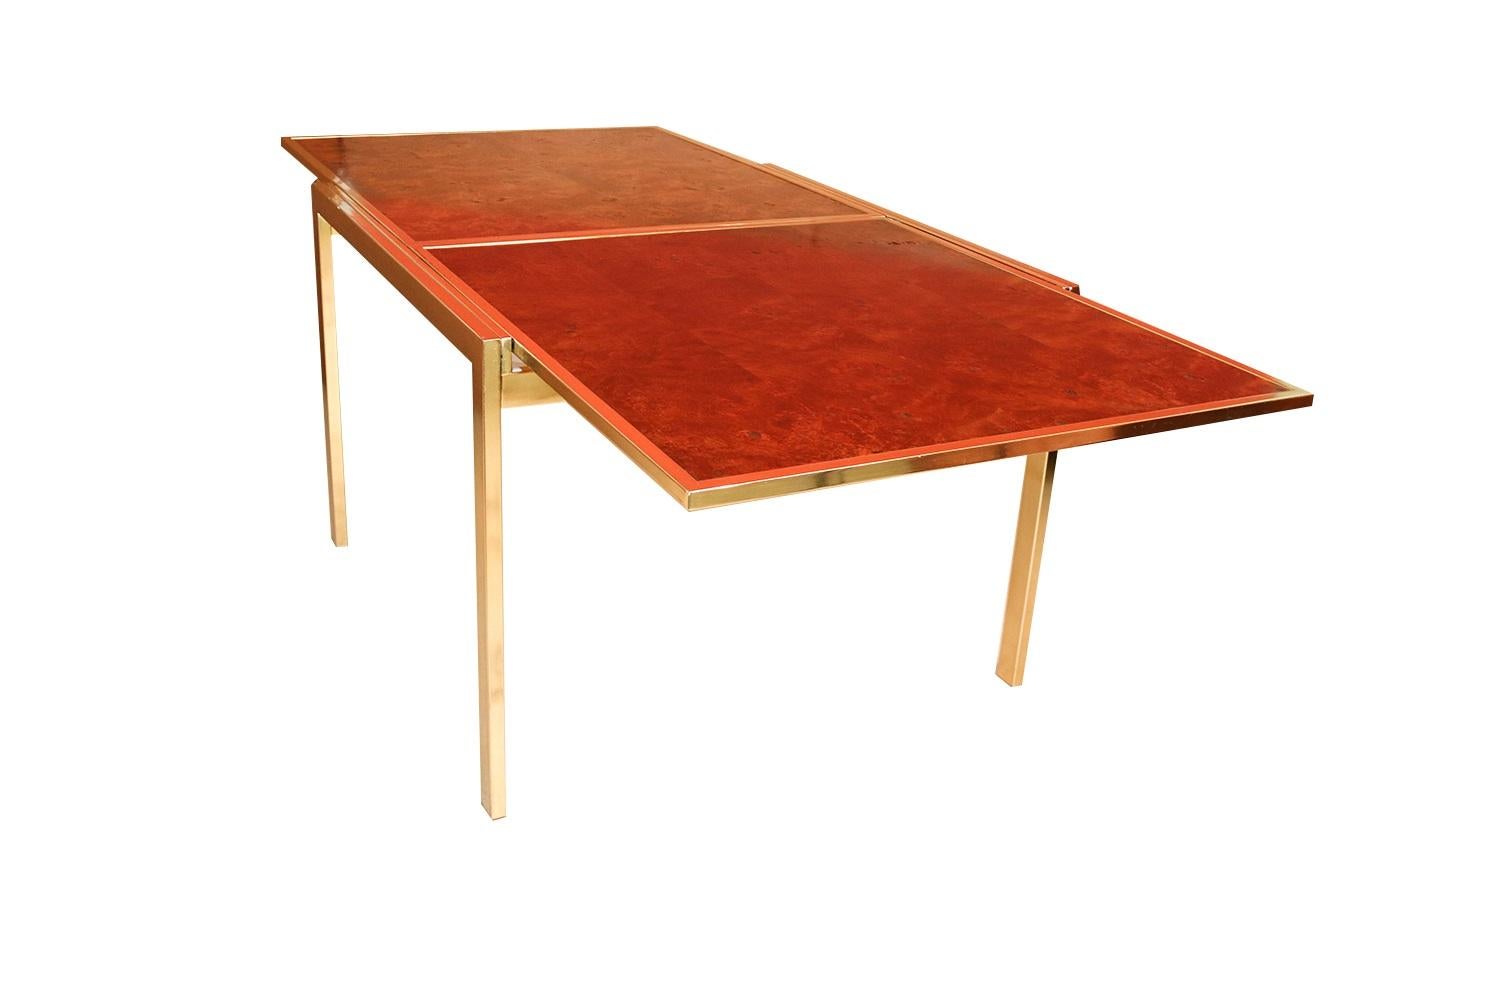 Exceptional Mid-Century Modern burled olive ash and brass extension draw dining table in the style of Milo Baughman. This striking vintage burled wood draw dining table in original good condition with fine brass metal work and details throughout. An